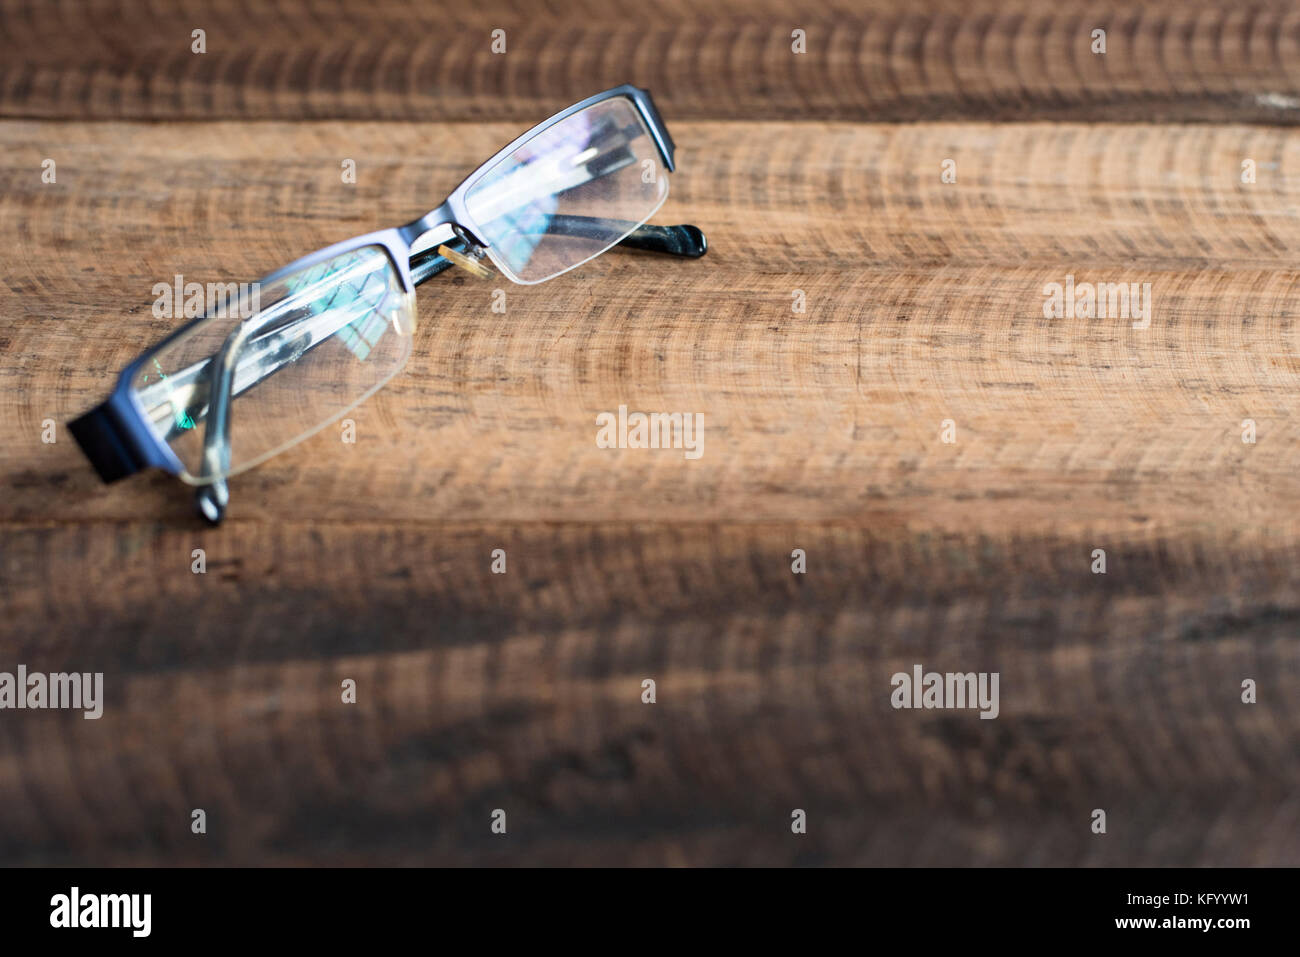 spectacle on a wooden background. spectacles with reflection of a window. image with copy space (selective focus) Stock Photo